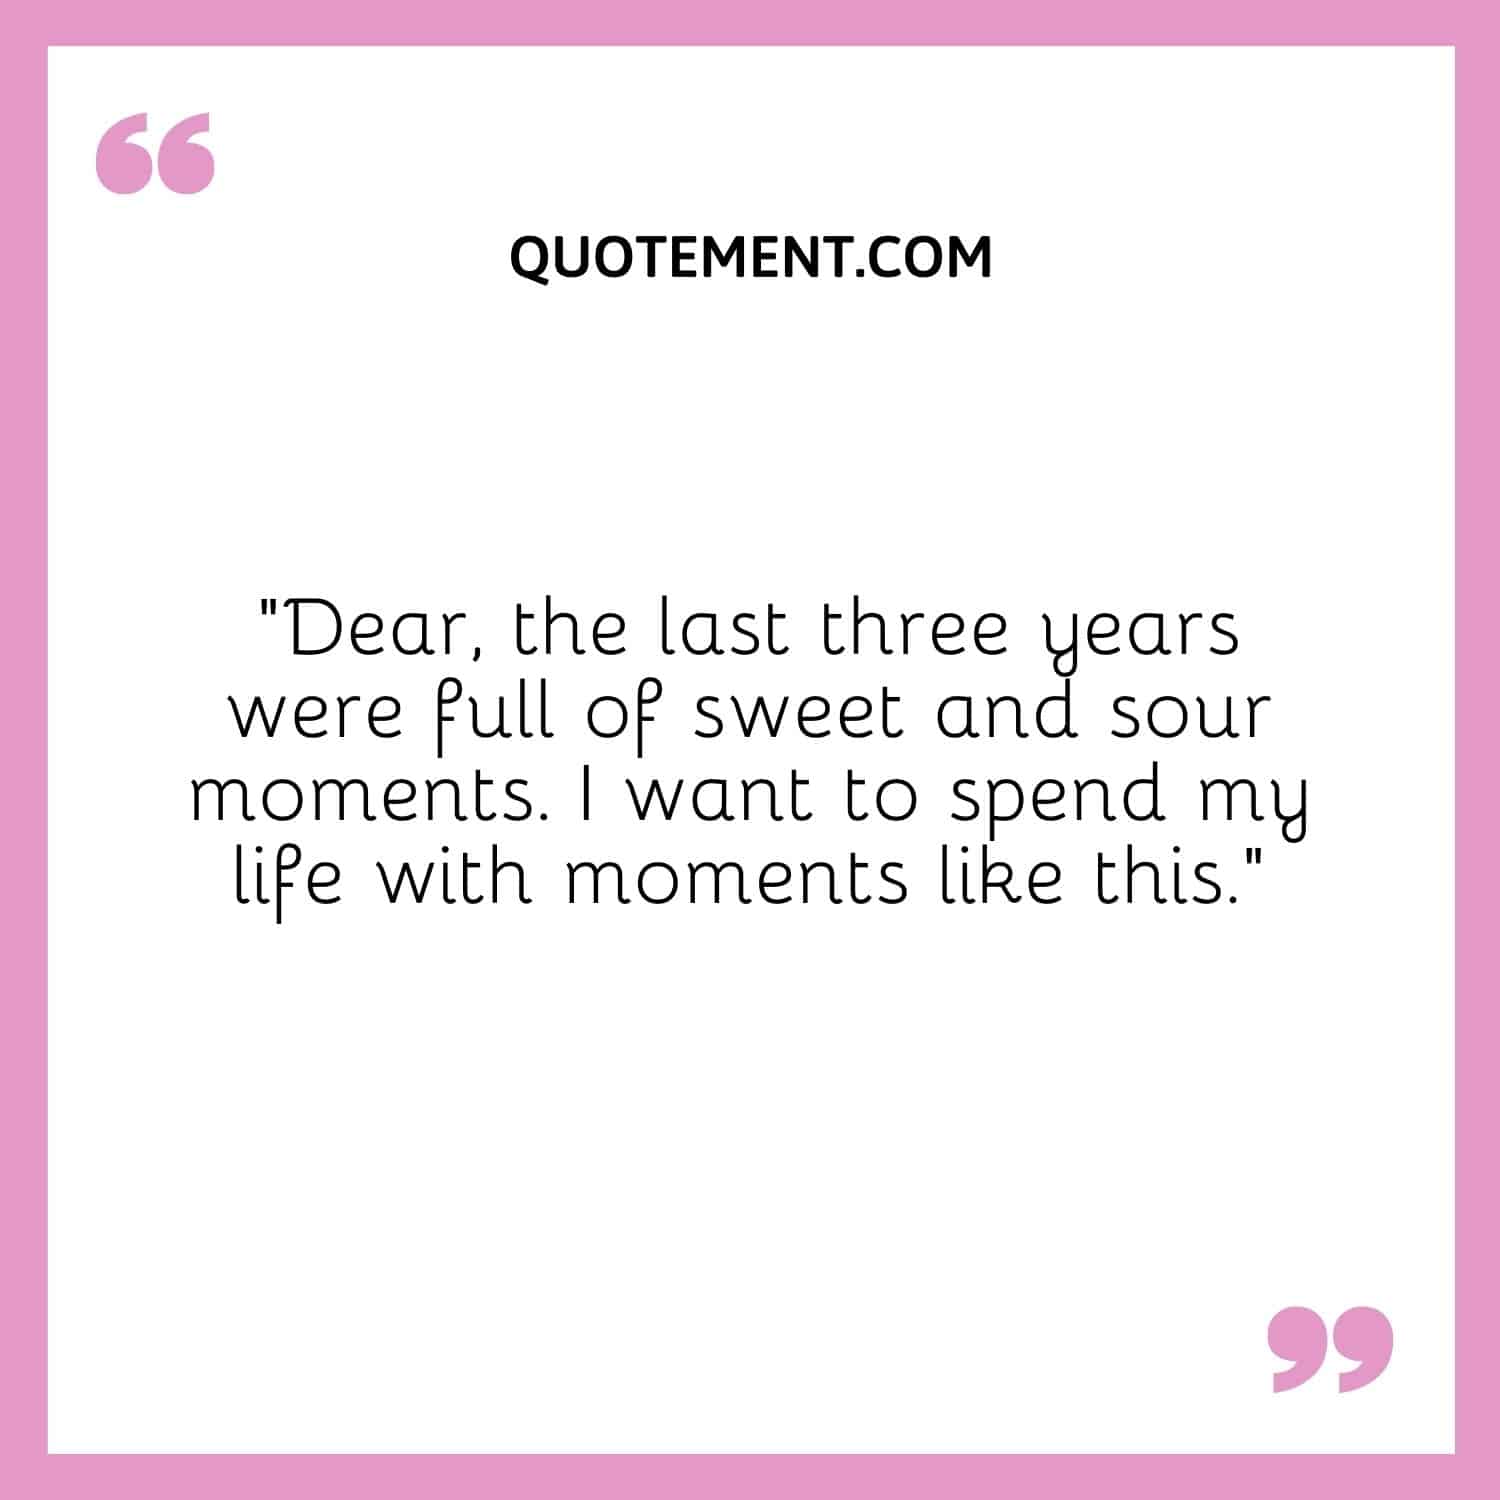 “Dear, the last three years were full of sweet and sour moments. I want to spend my life with moments like this.”